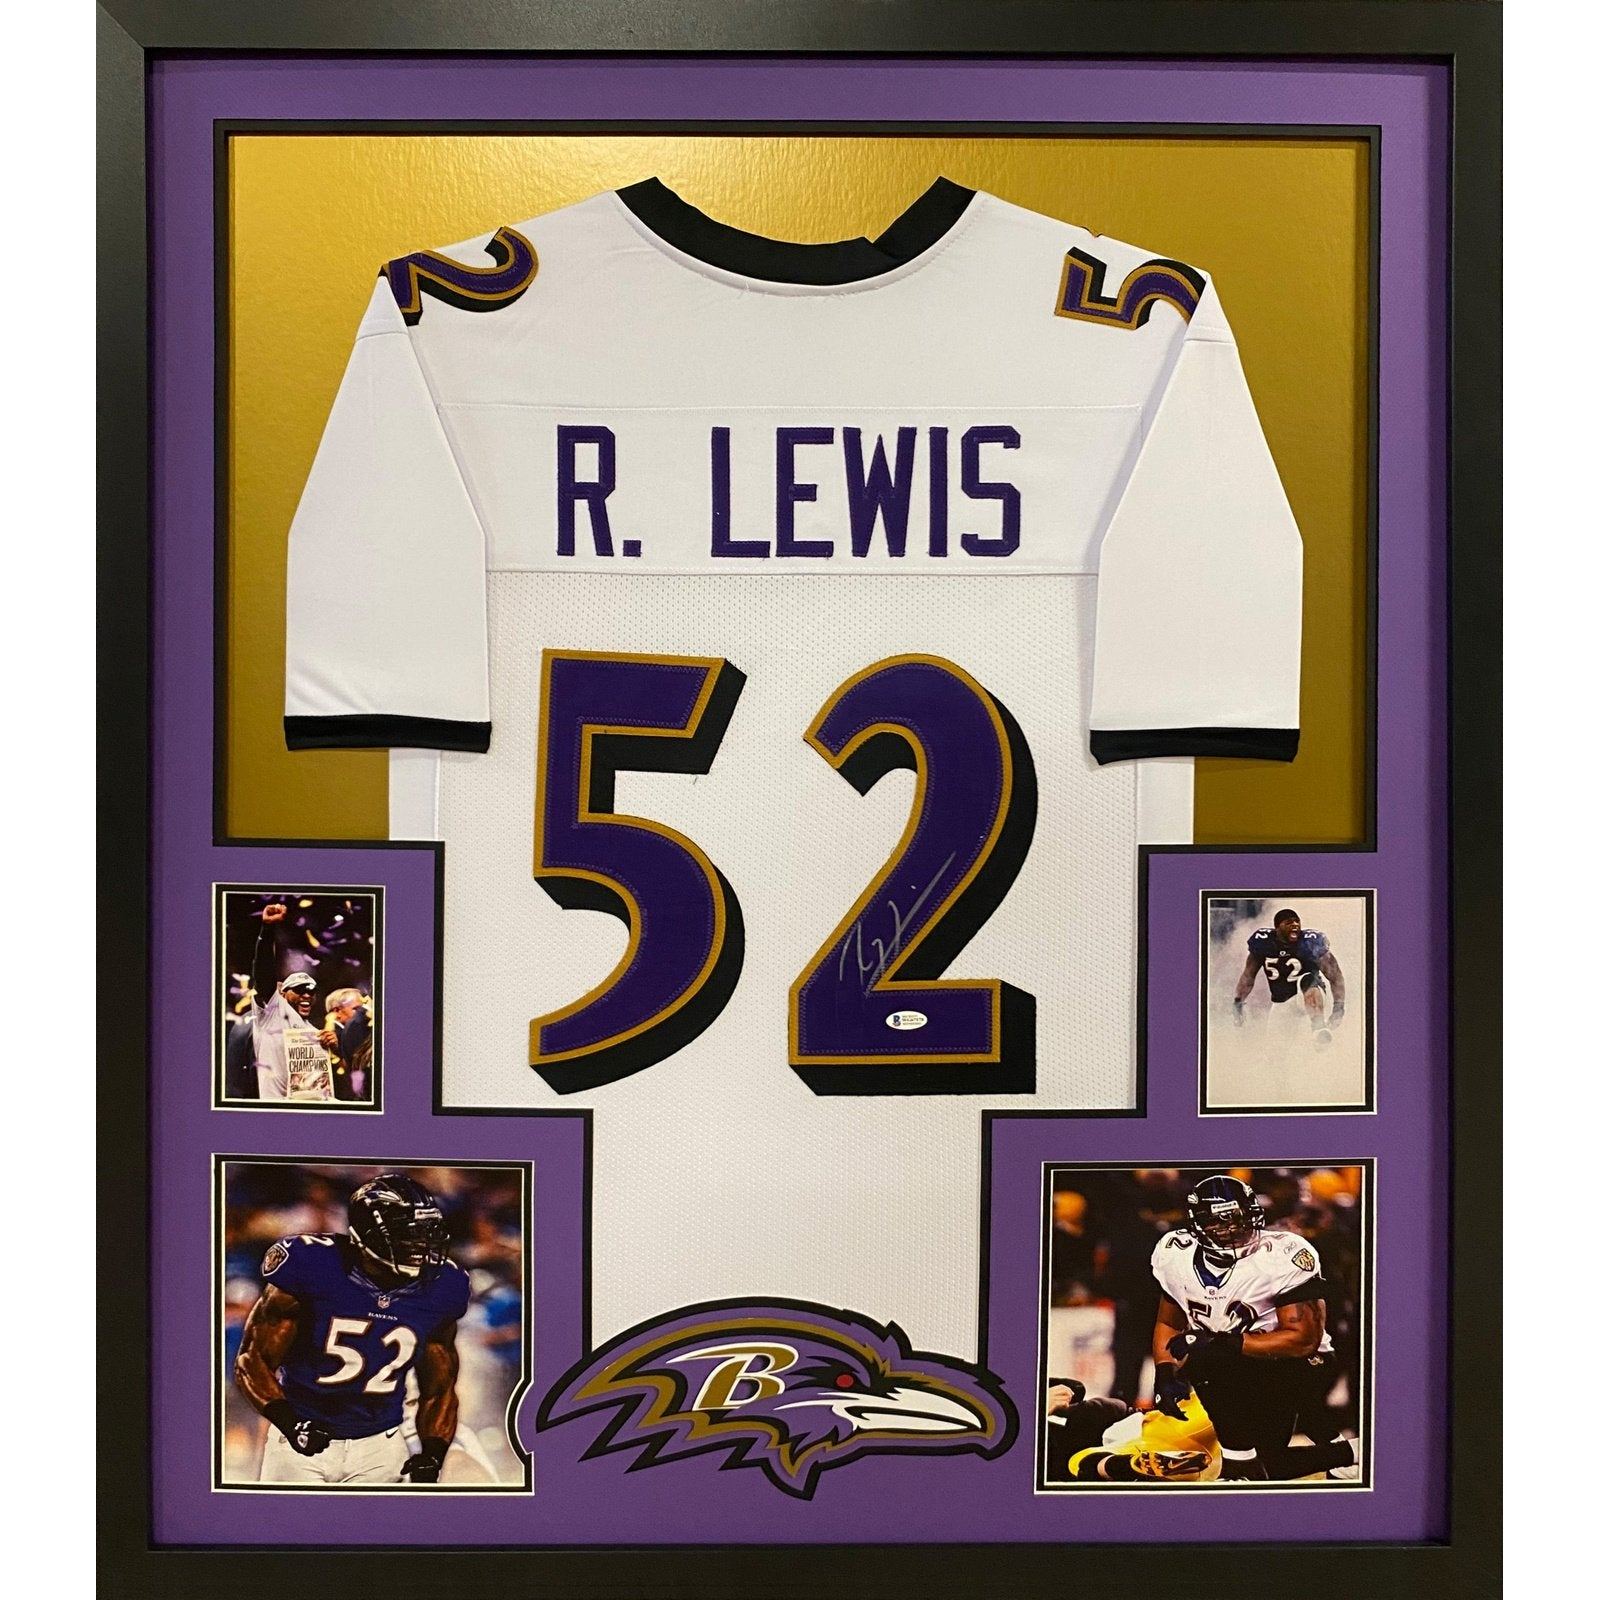 white ray lewis jersey